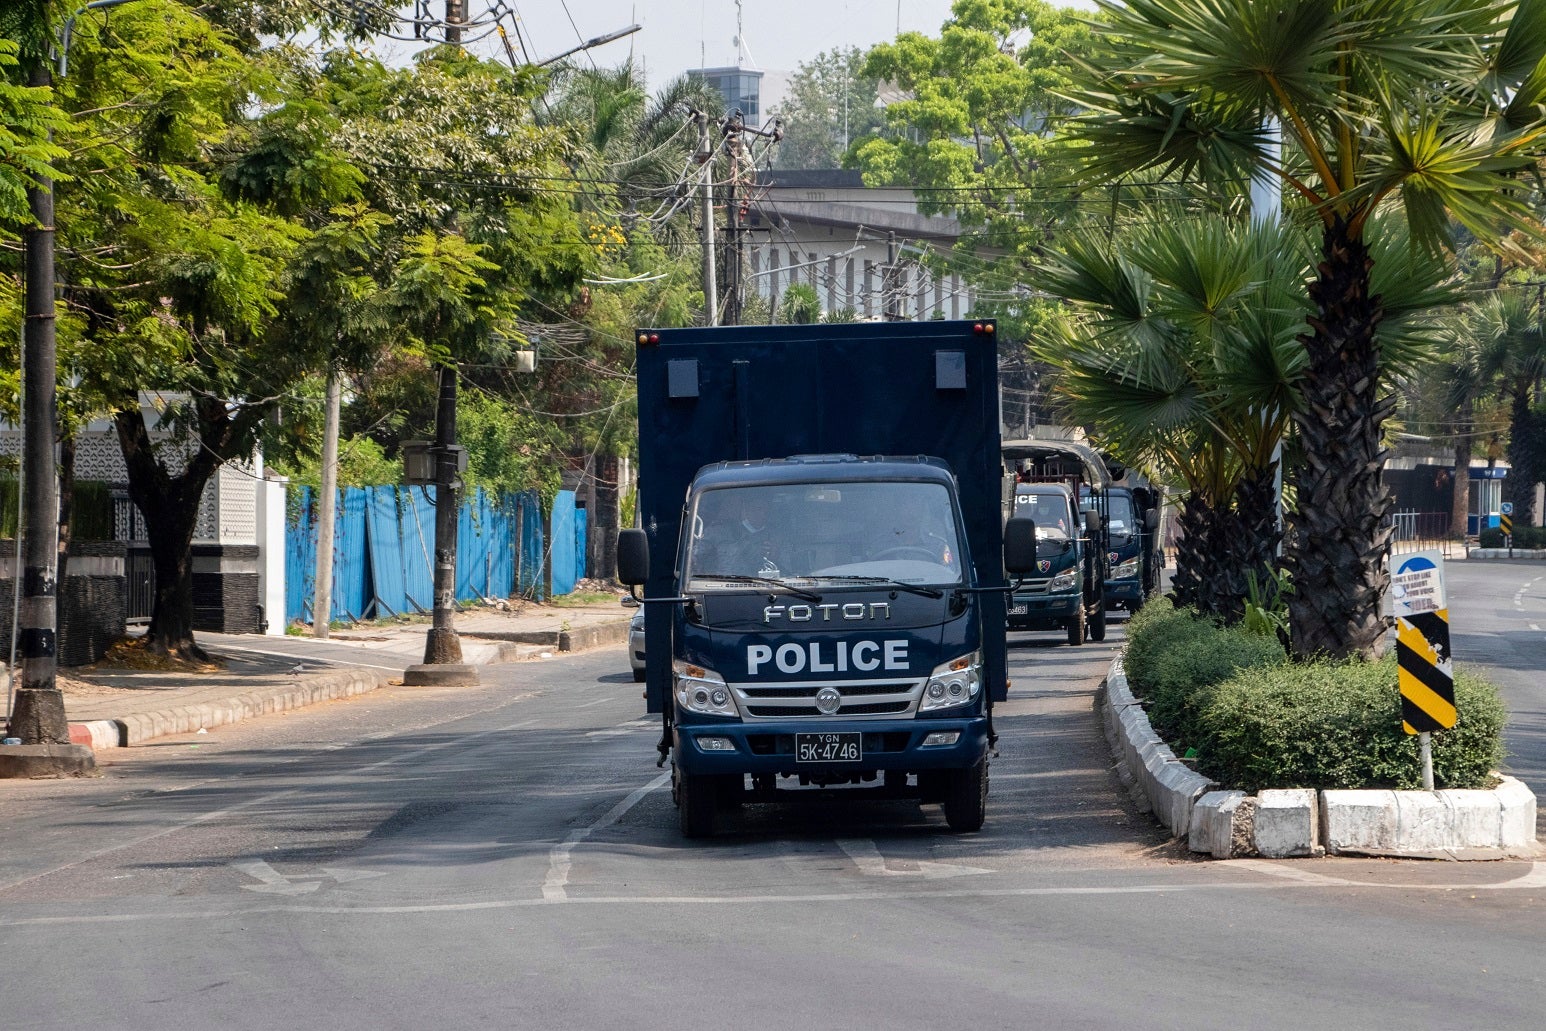 Police car is seen on a street during the military coup demonstration.